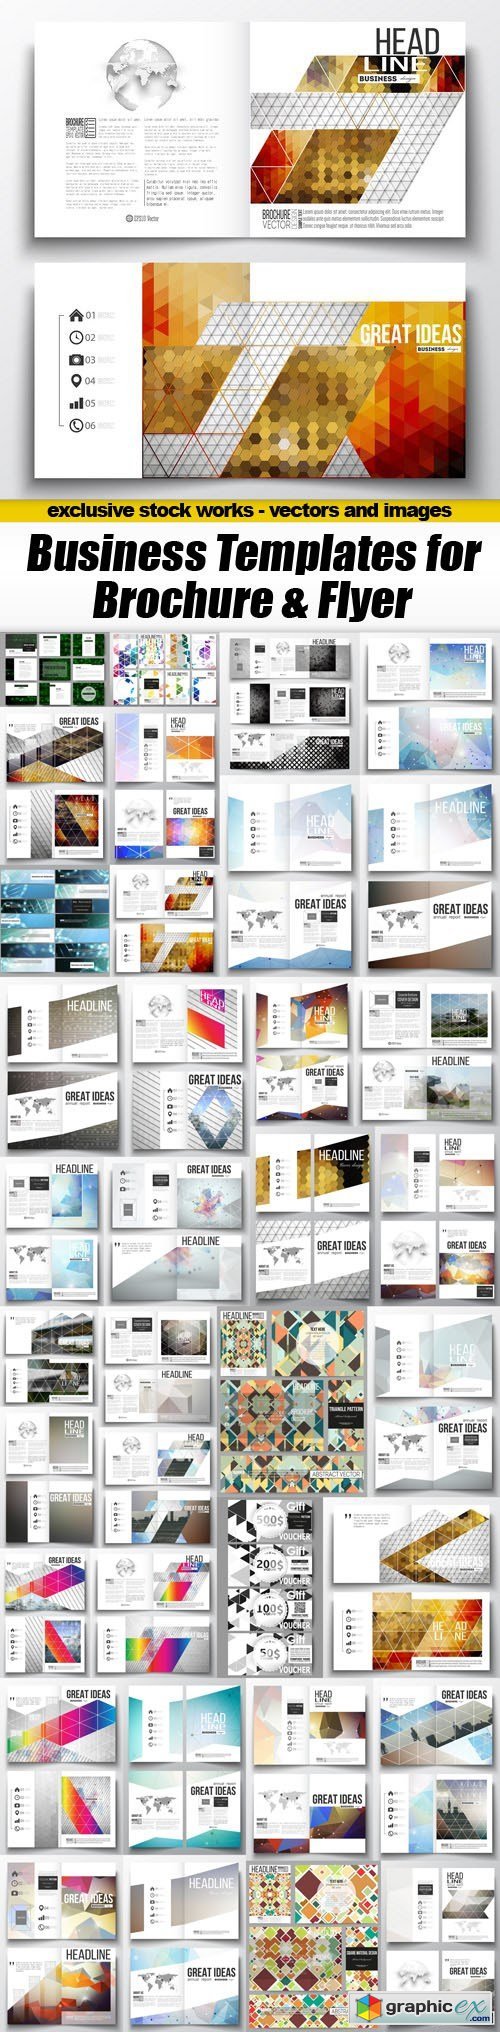 Business Templates for Brochure & Flyer - 36xEPS